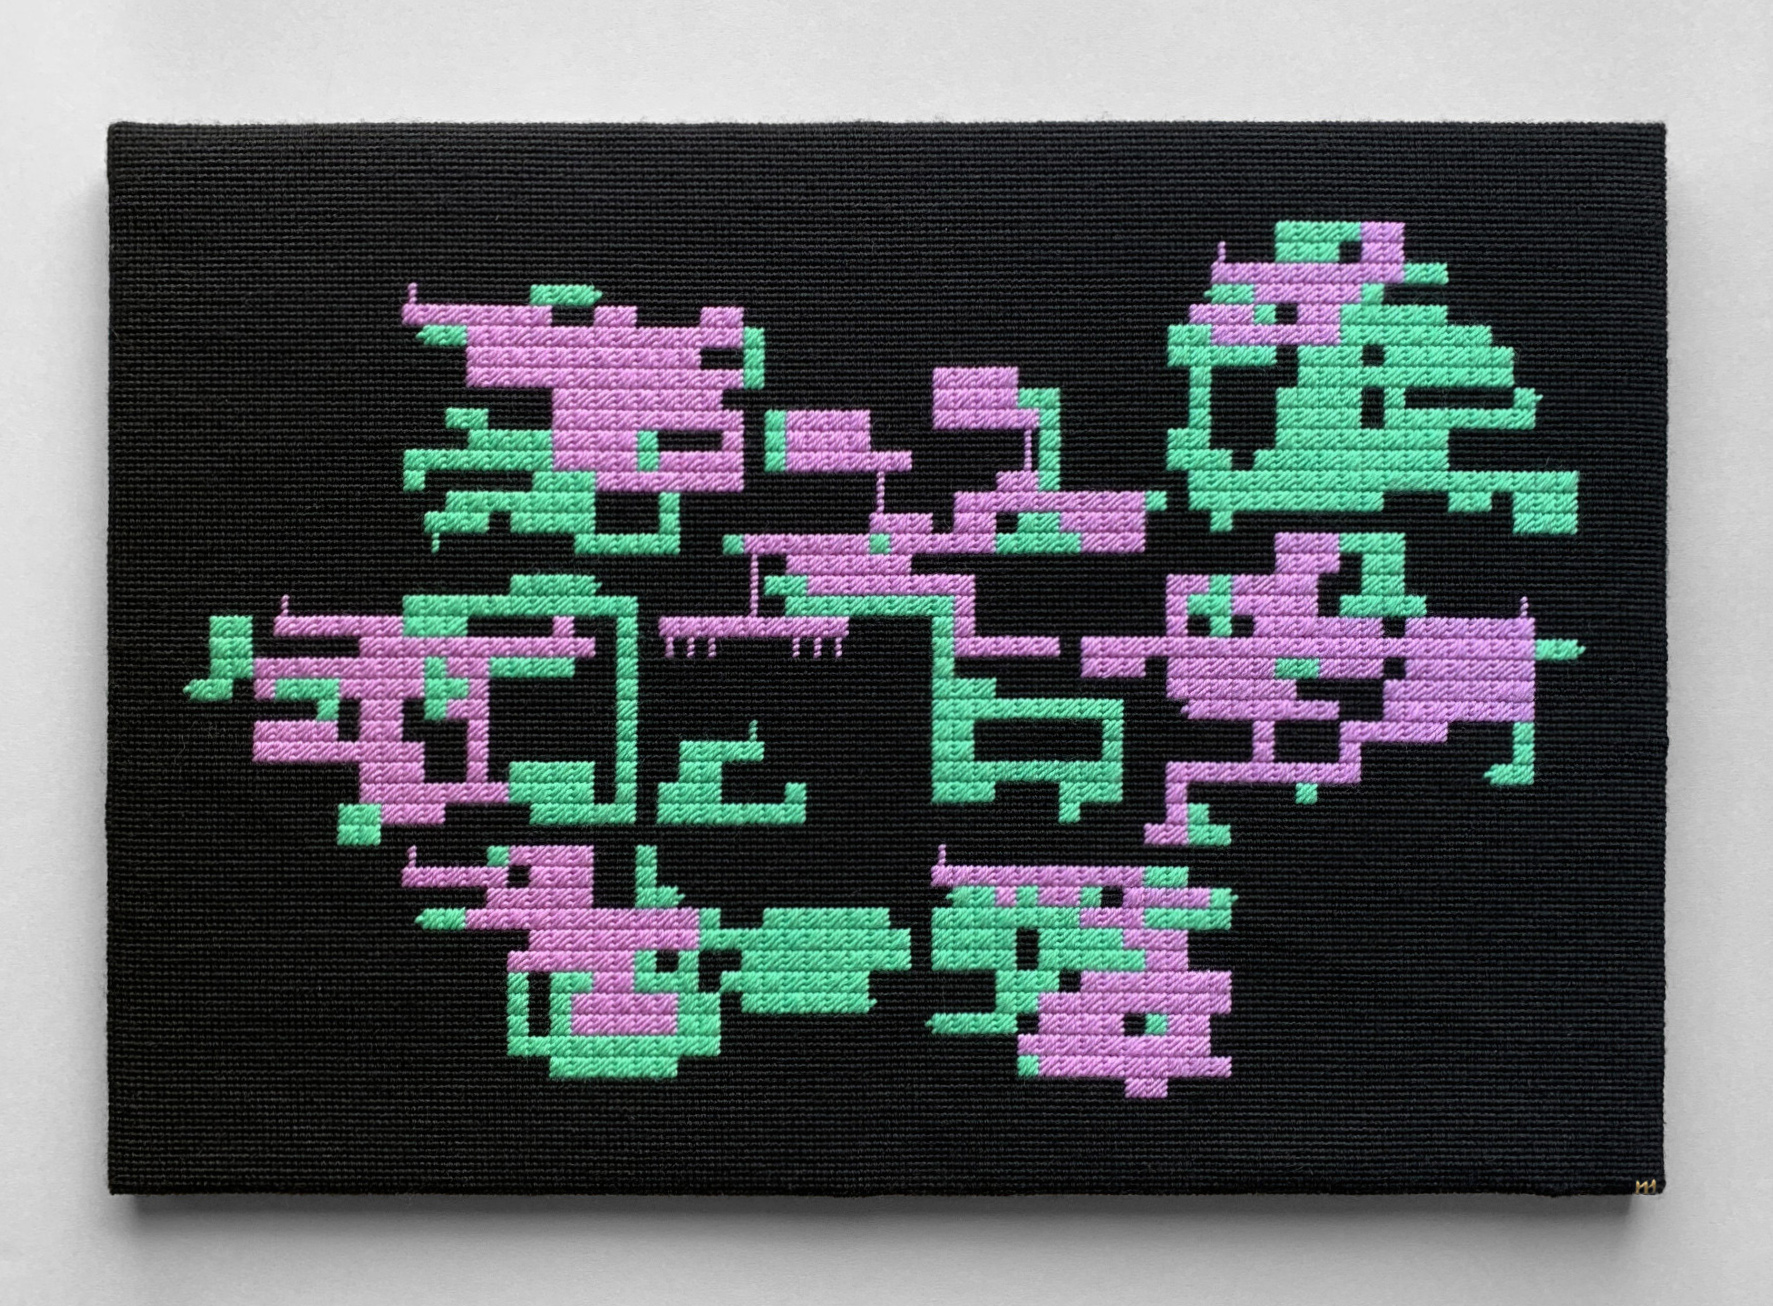  / Needlepoint of the map from *Metroid Fusion* video game, in its GBA version. Art by artist Marine Beaufils.